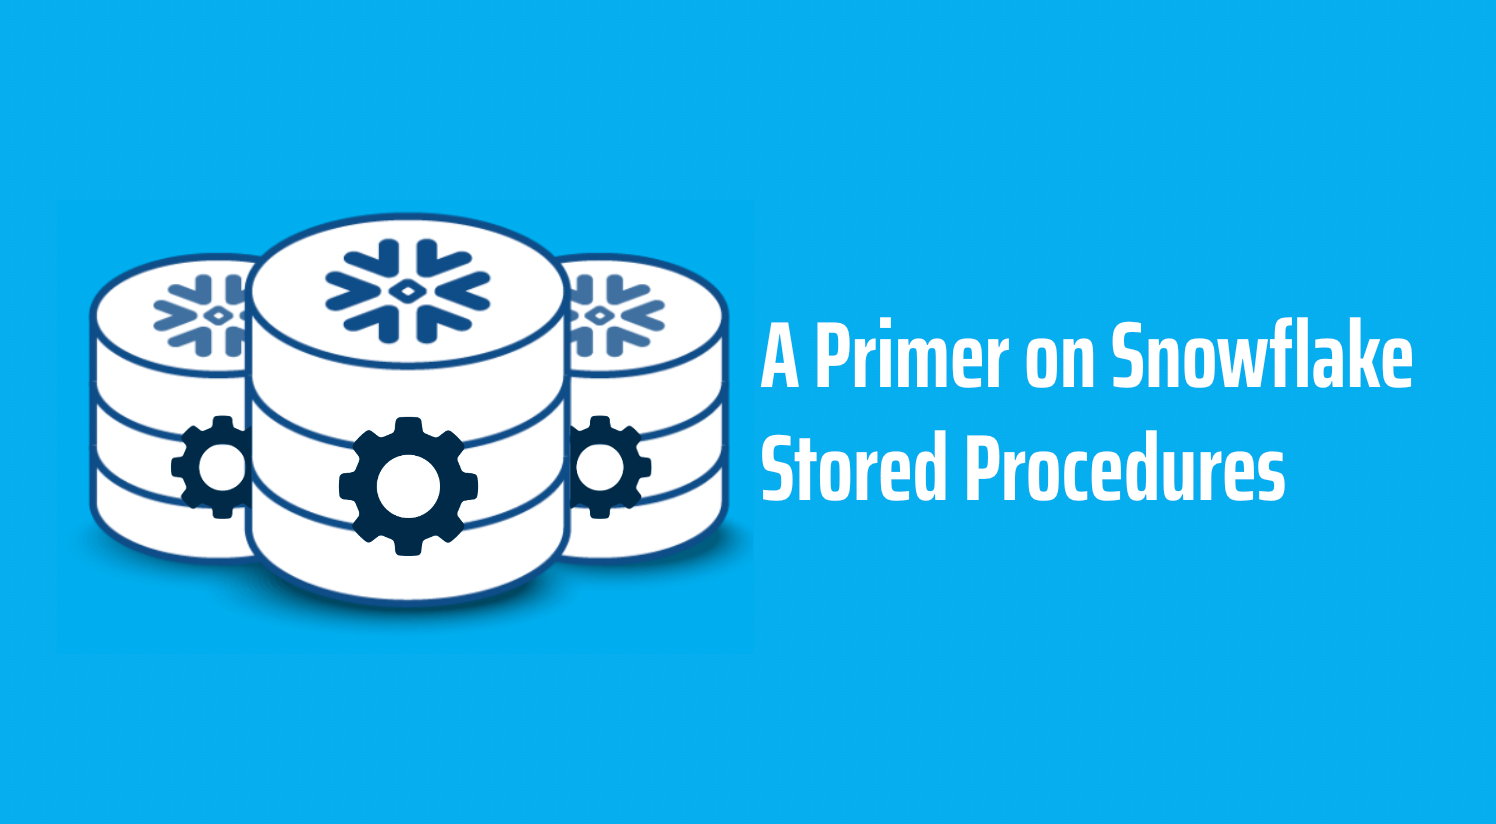 A Primer on Snowflake Stored Procedures